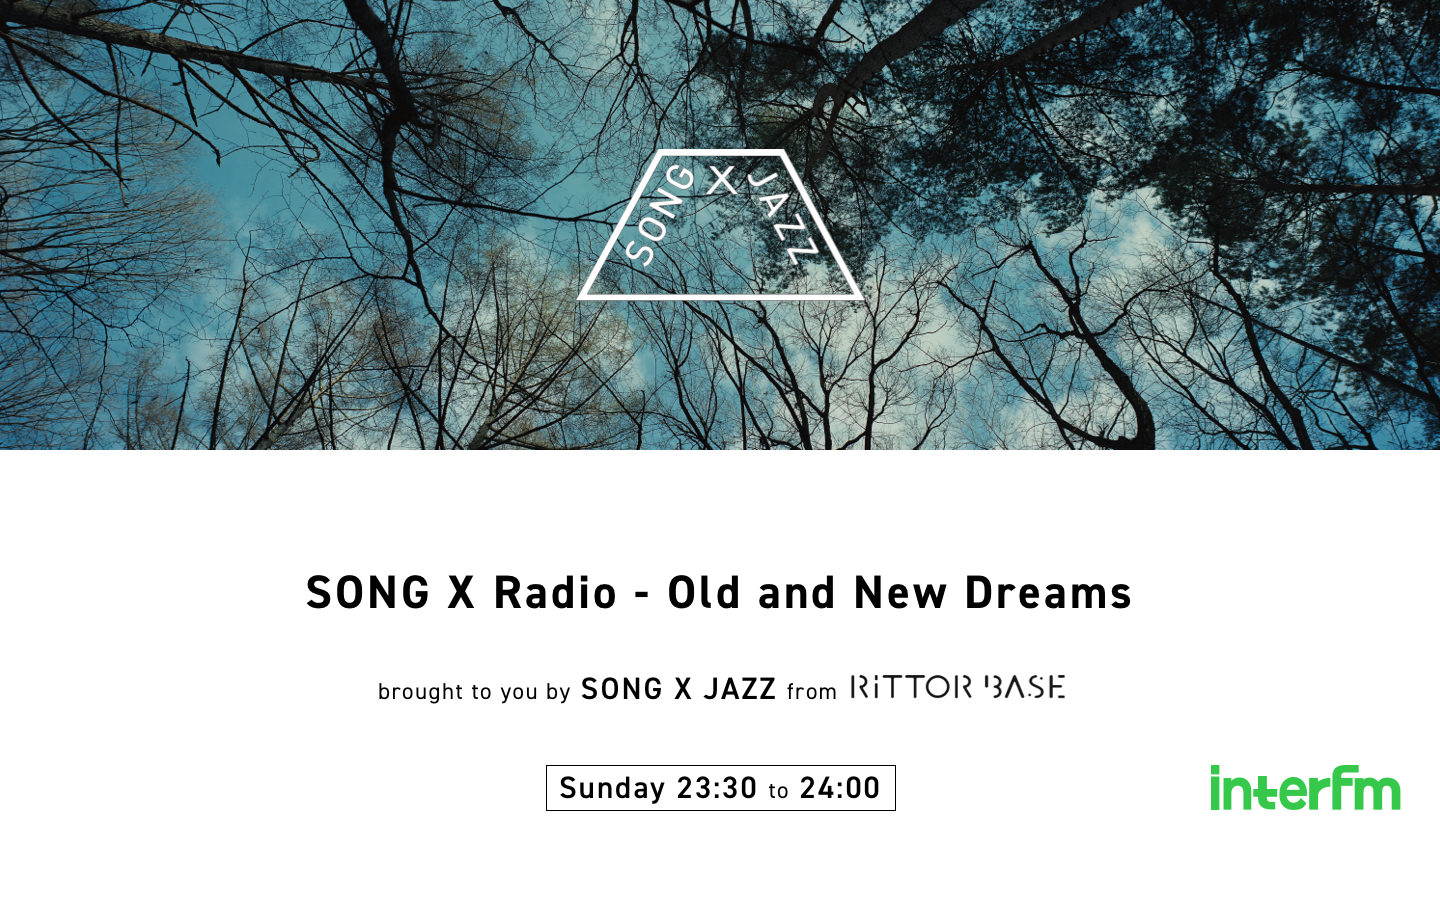 SONG X Radio - Old and New Dreams